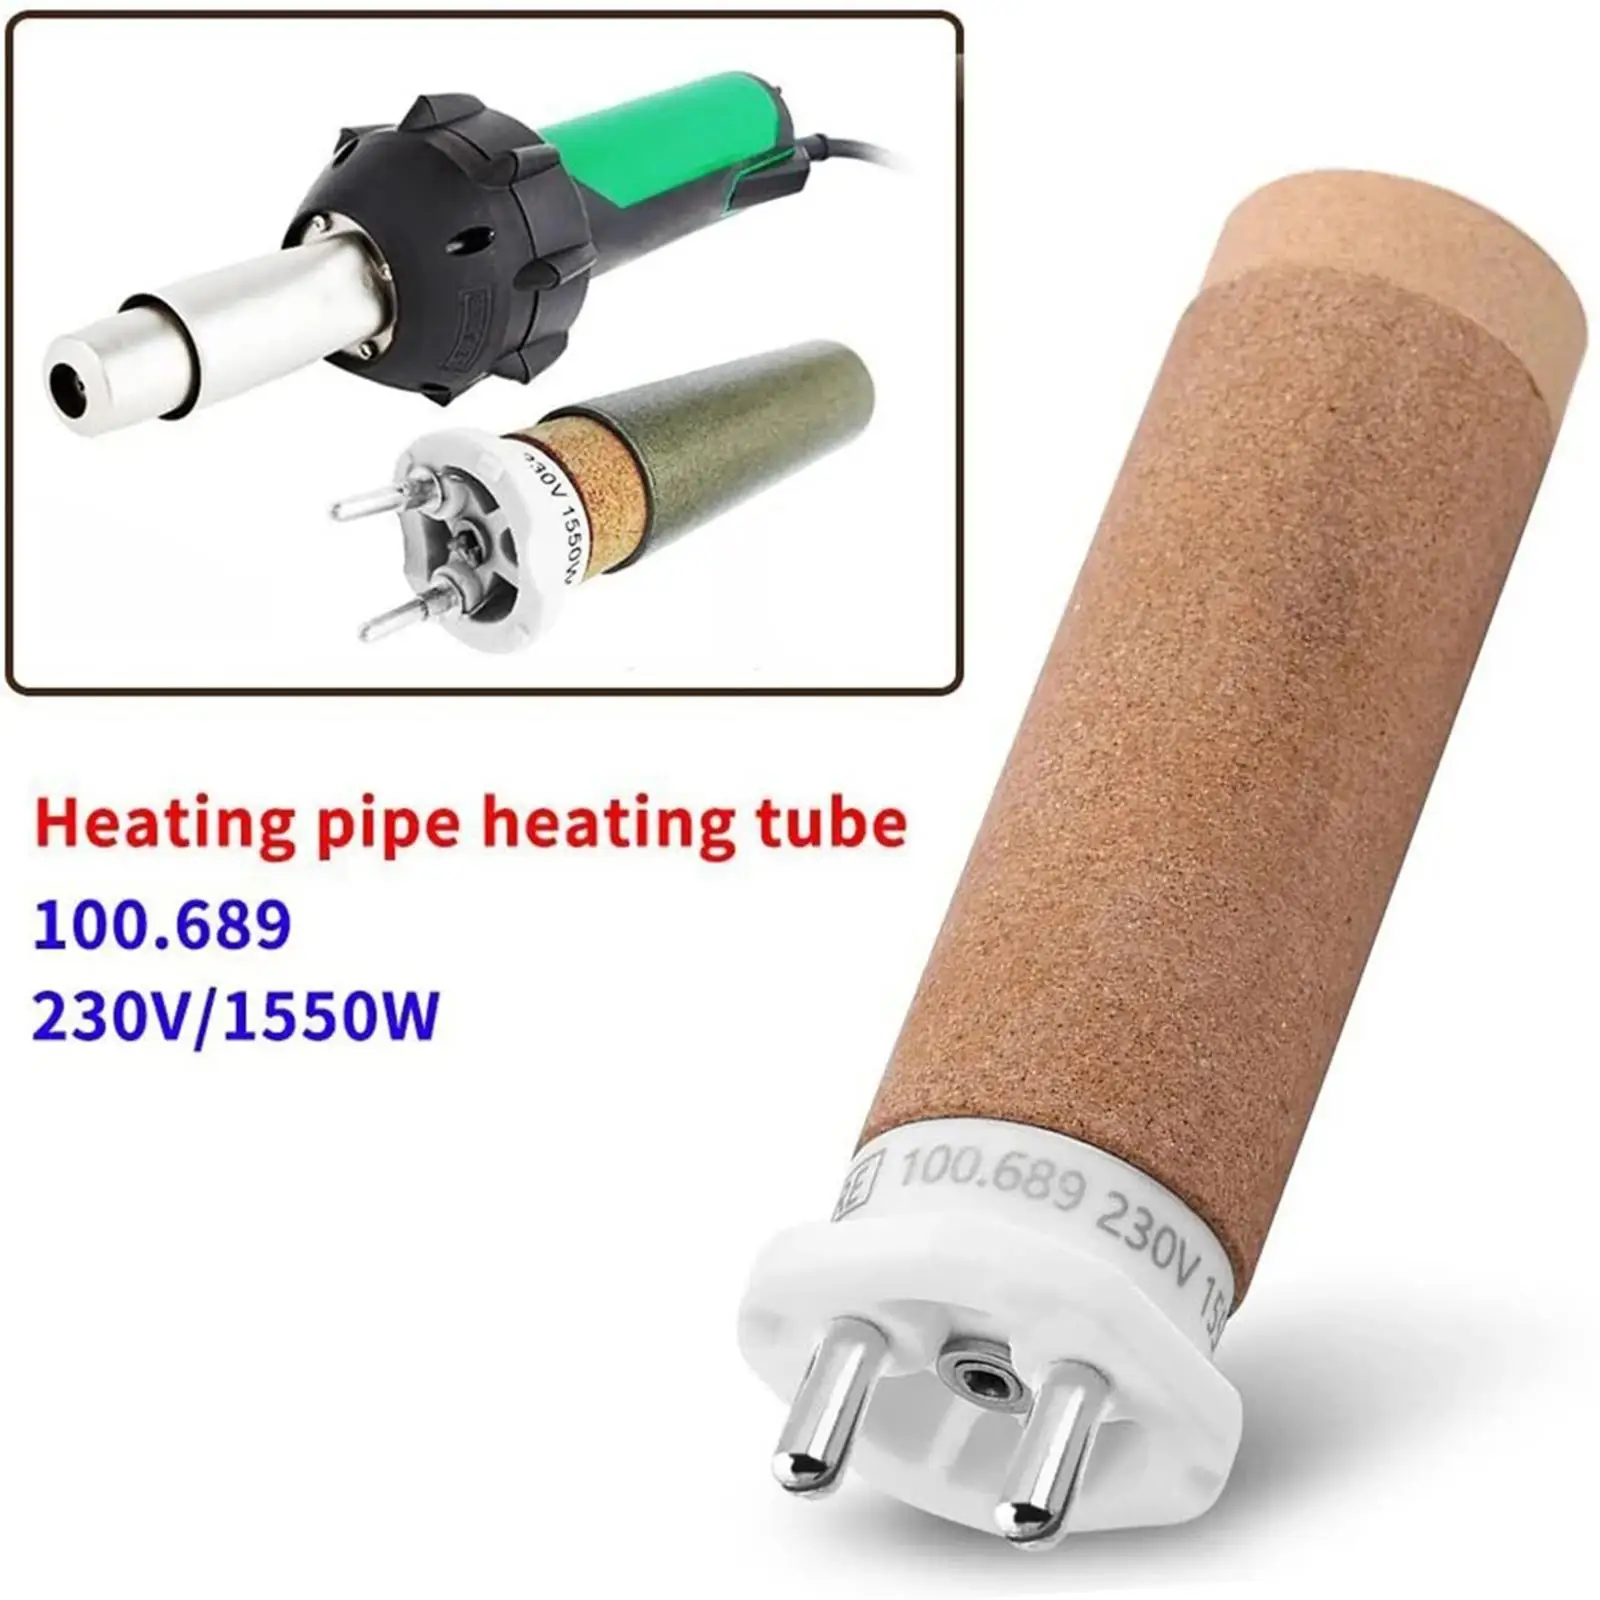 

Professional Quality Heating Element Not Easily Broken Durable Hand Held Replacement with Mica Tube Ceramic Heating Core Parts